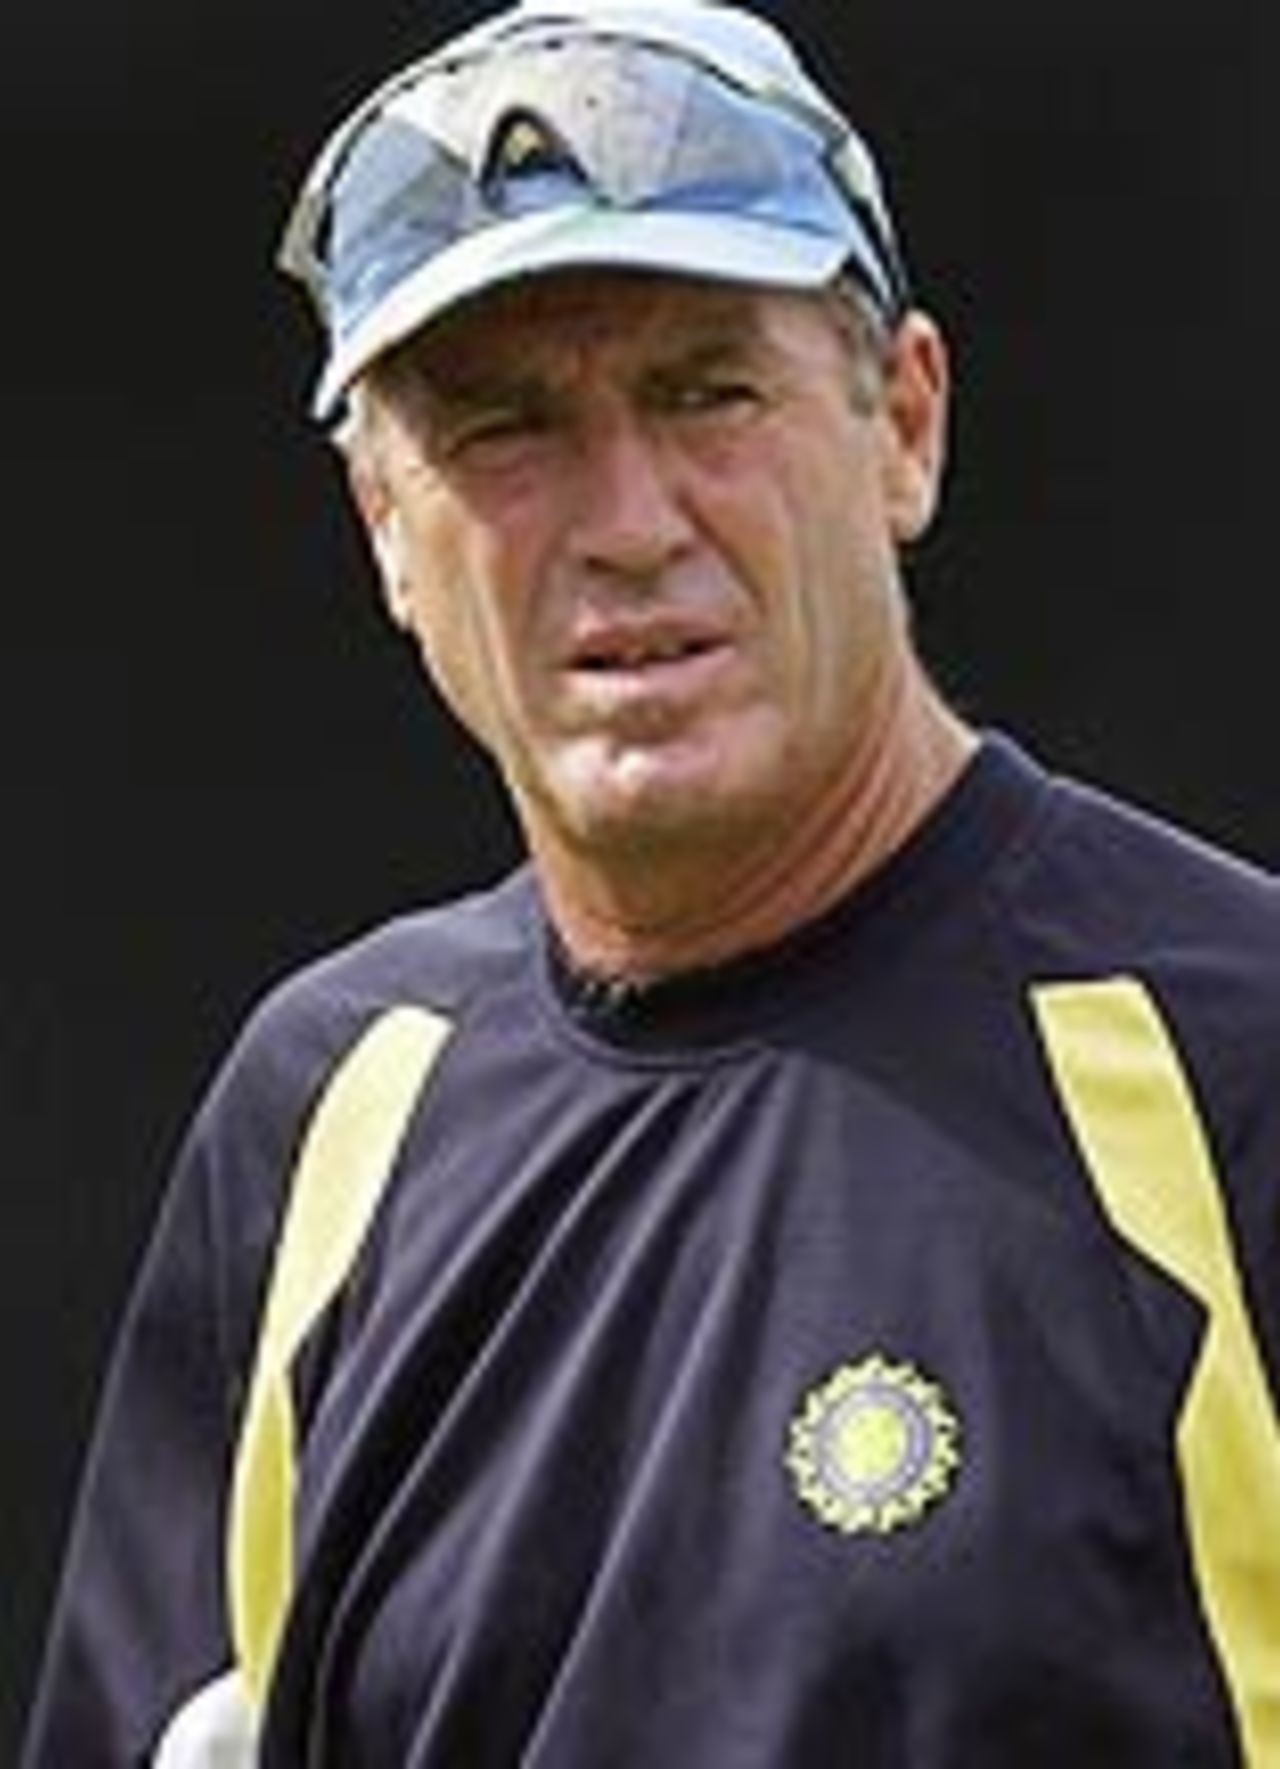 India coach John Wright looks on during the India nets session at Kingsmead, Durban, South Africa on February 24, 2003